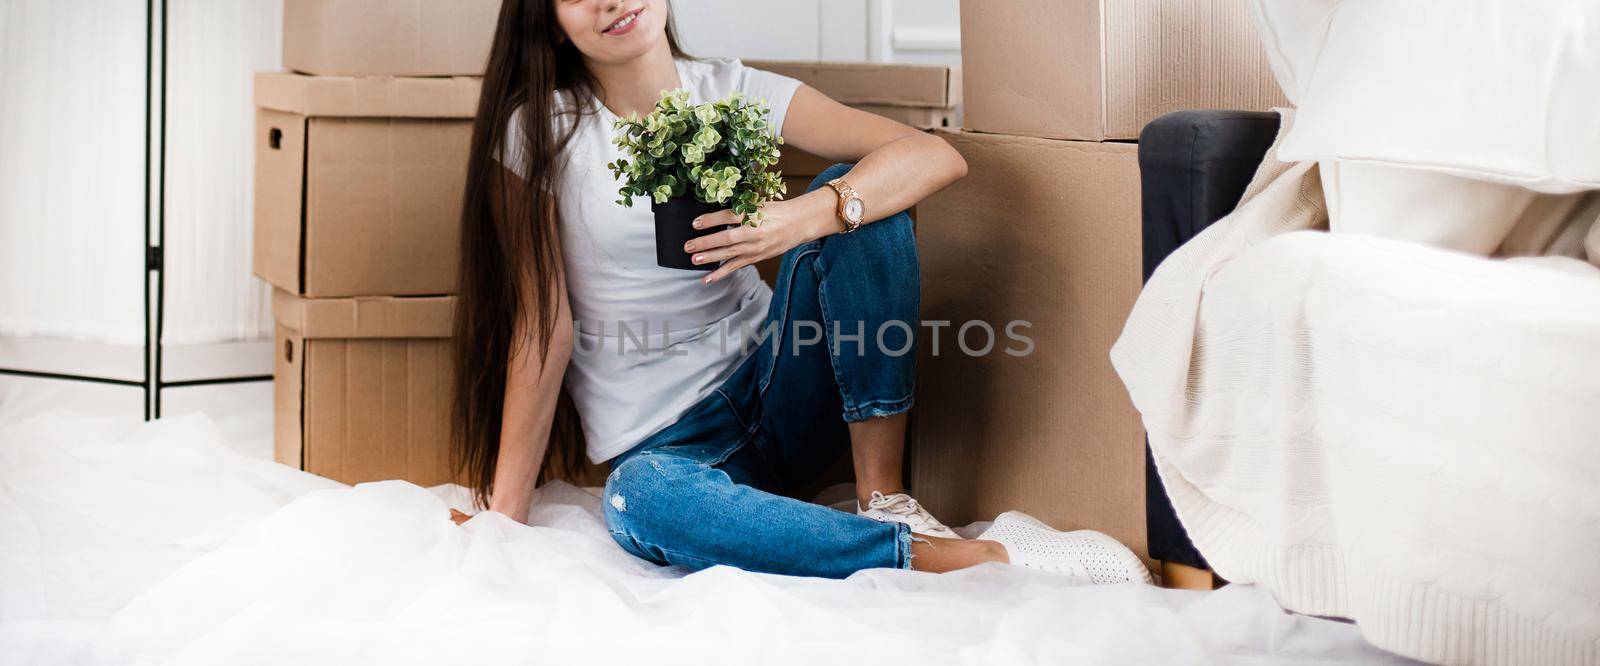 young woman with a home plant sitting on the floor in the new living room. photo with copy-space